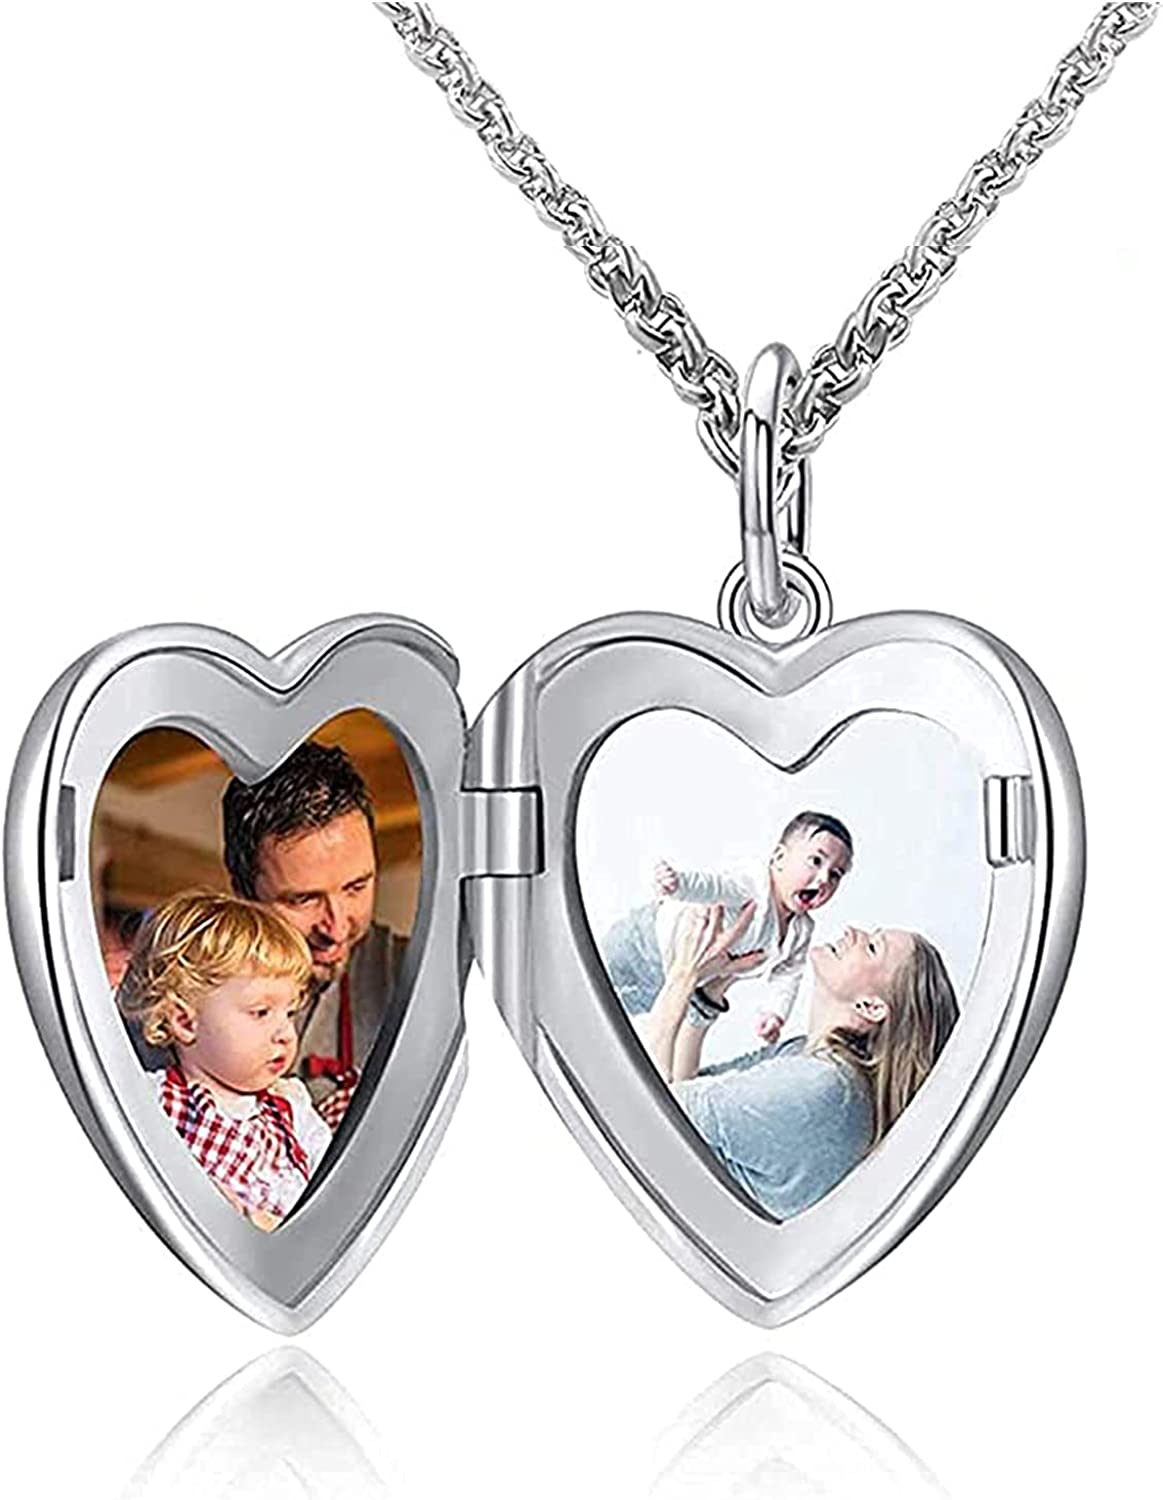 HANRU 925 Sterling Silver Locket Necklace That Holds 1-2 Pictures  Customized Full Color Photo Lockets Jewelry for Women Girls,  Heart/Round/Oval Shape, Chain Length 16 18 22 